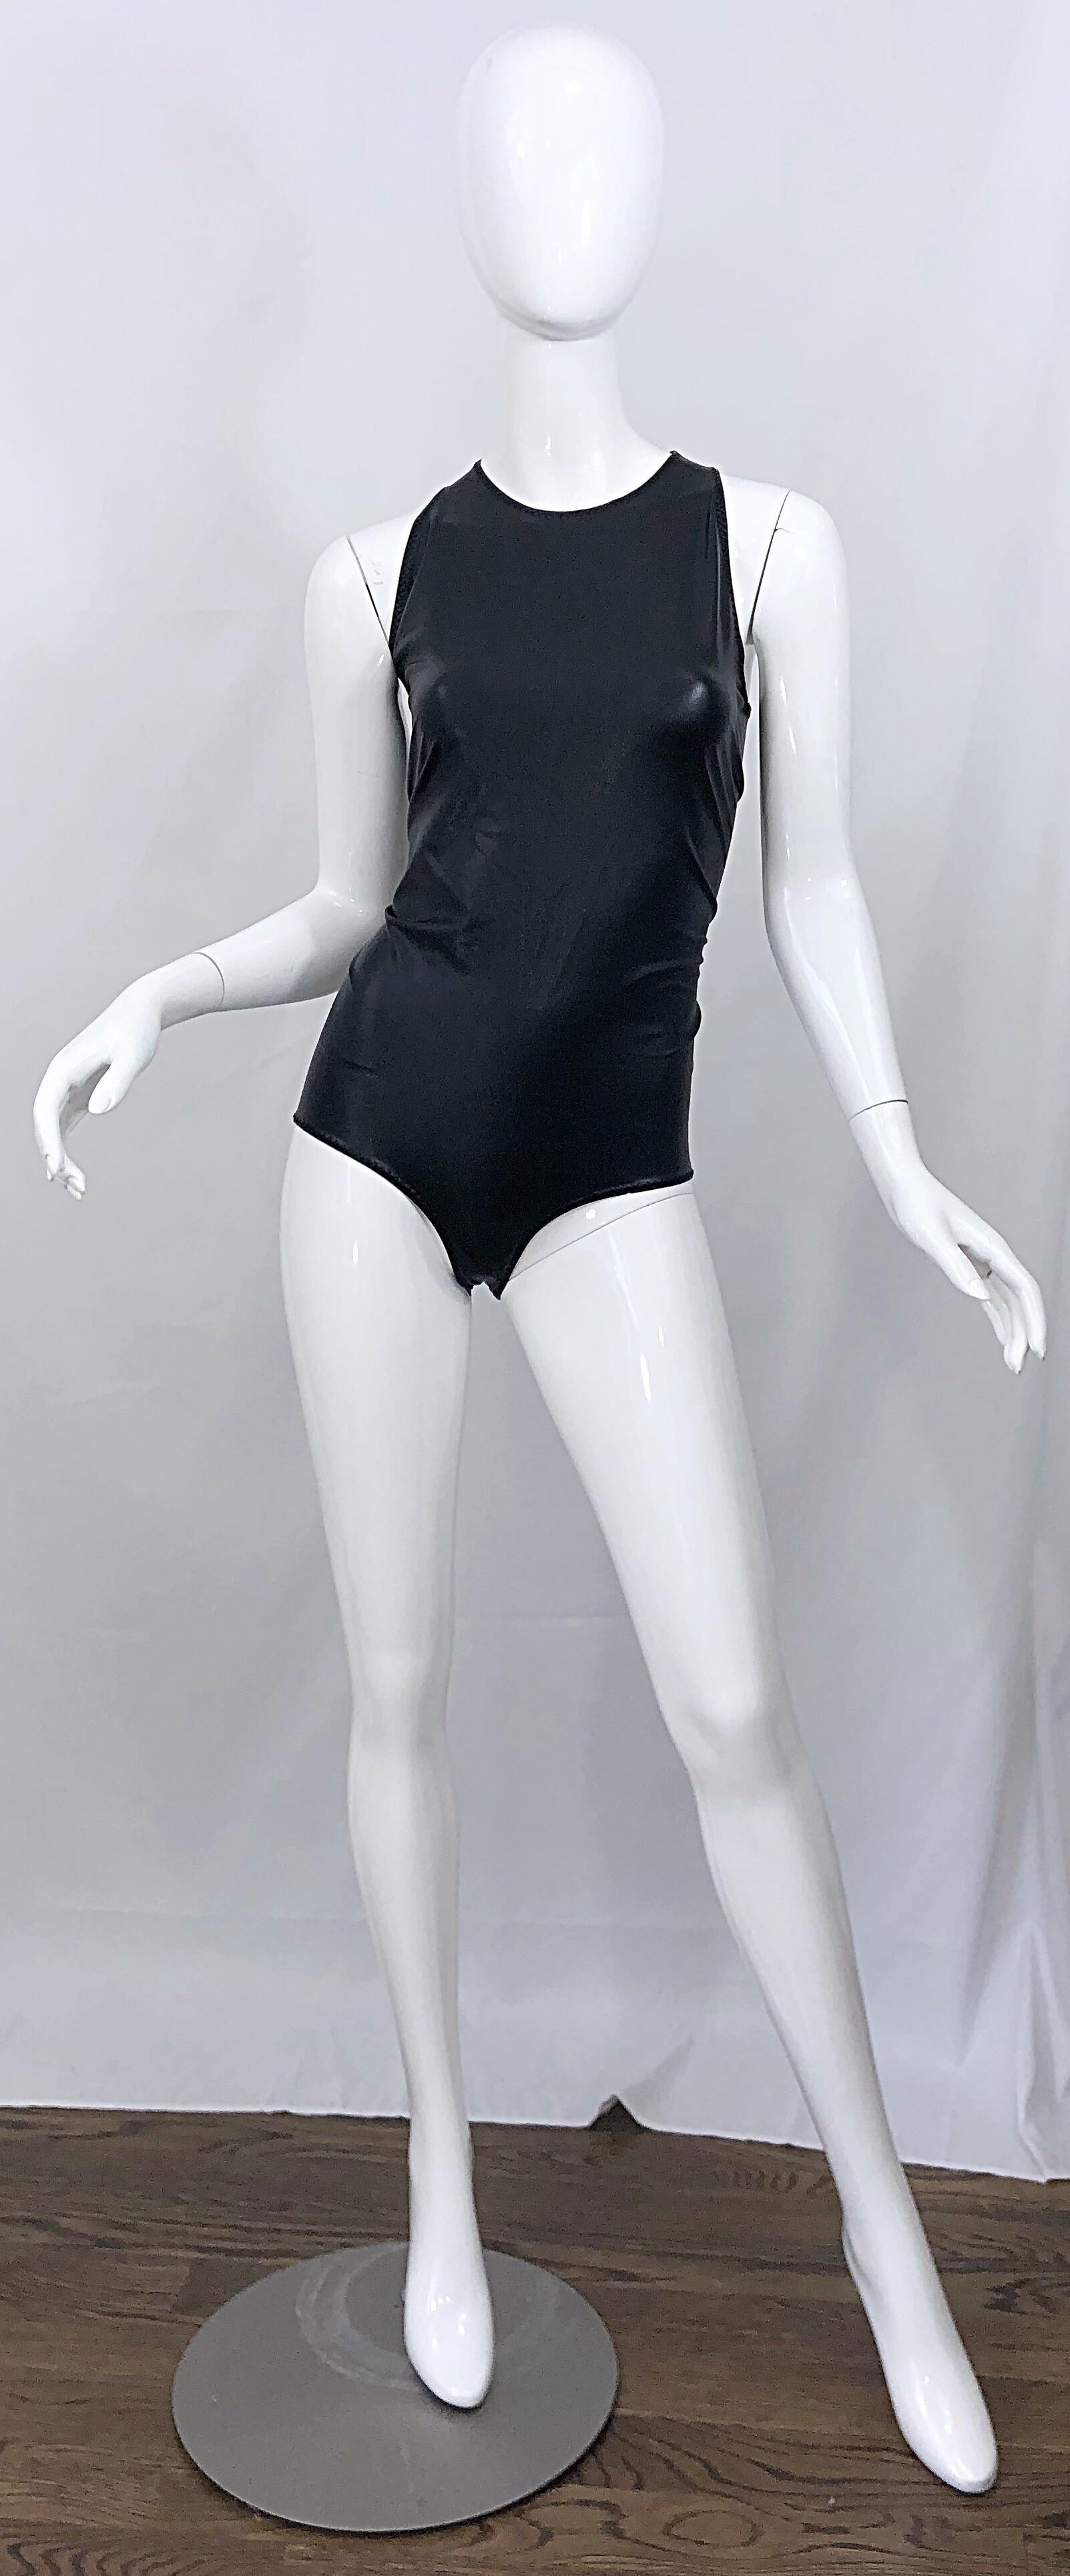 Sexy never worn vintage 90s BOTTEGA VENETA black pleather dominatrix fetish one piece bodysuit! Features a flatter very stretchy black pleather. Hidden zipper up the back. Extremely well made, with every detail perfectly finalized. Great with jeans,